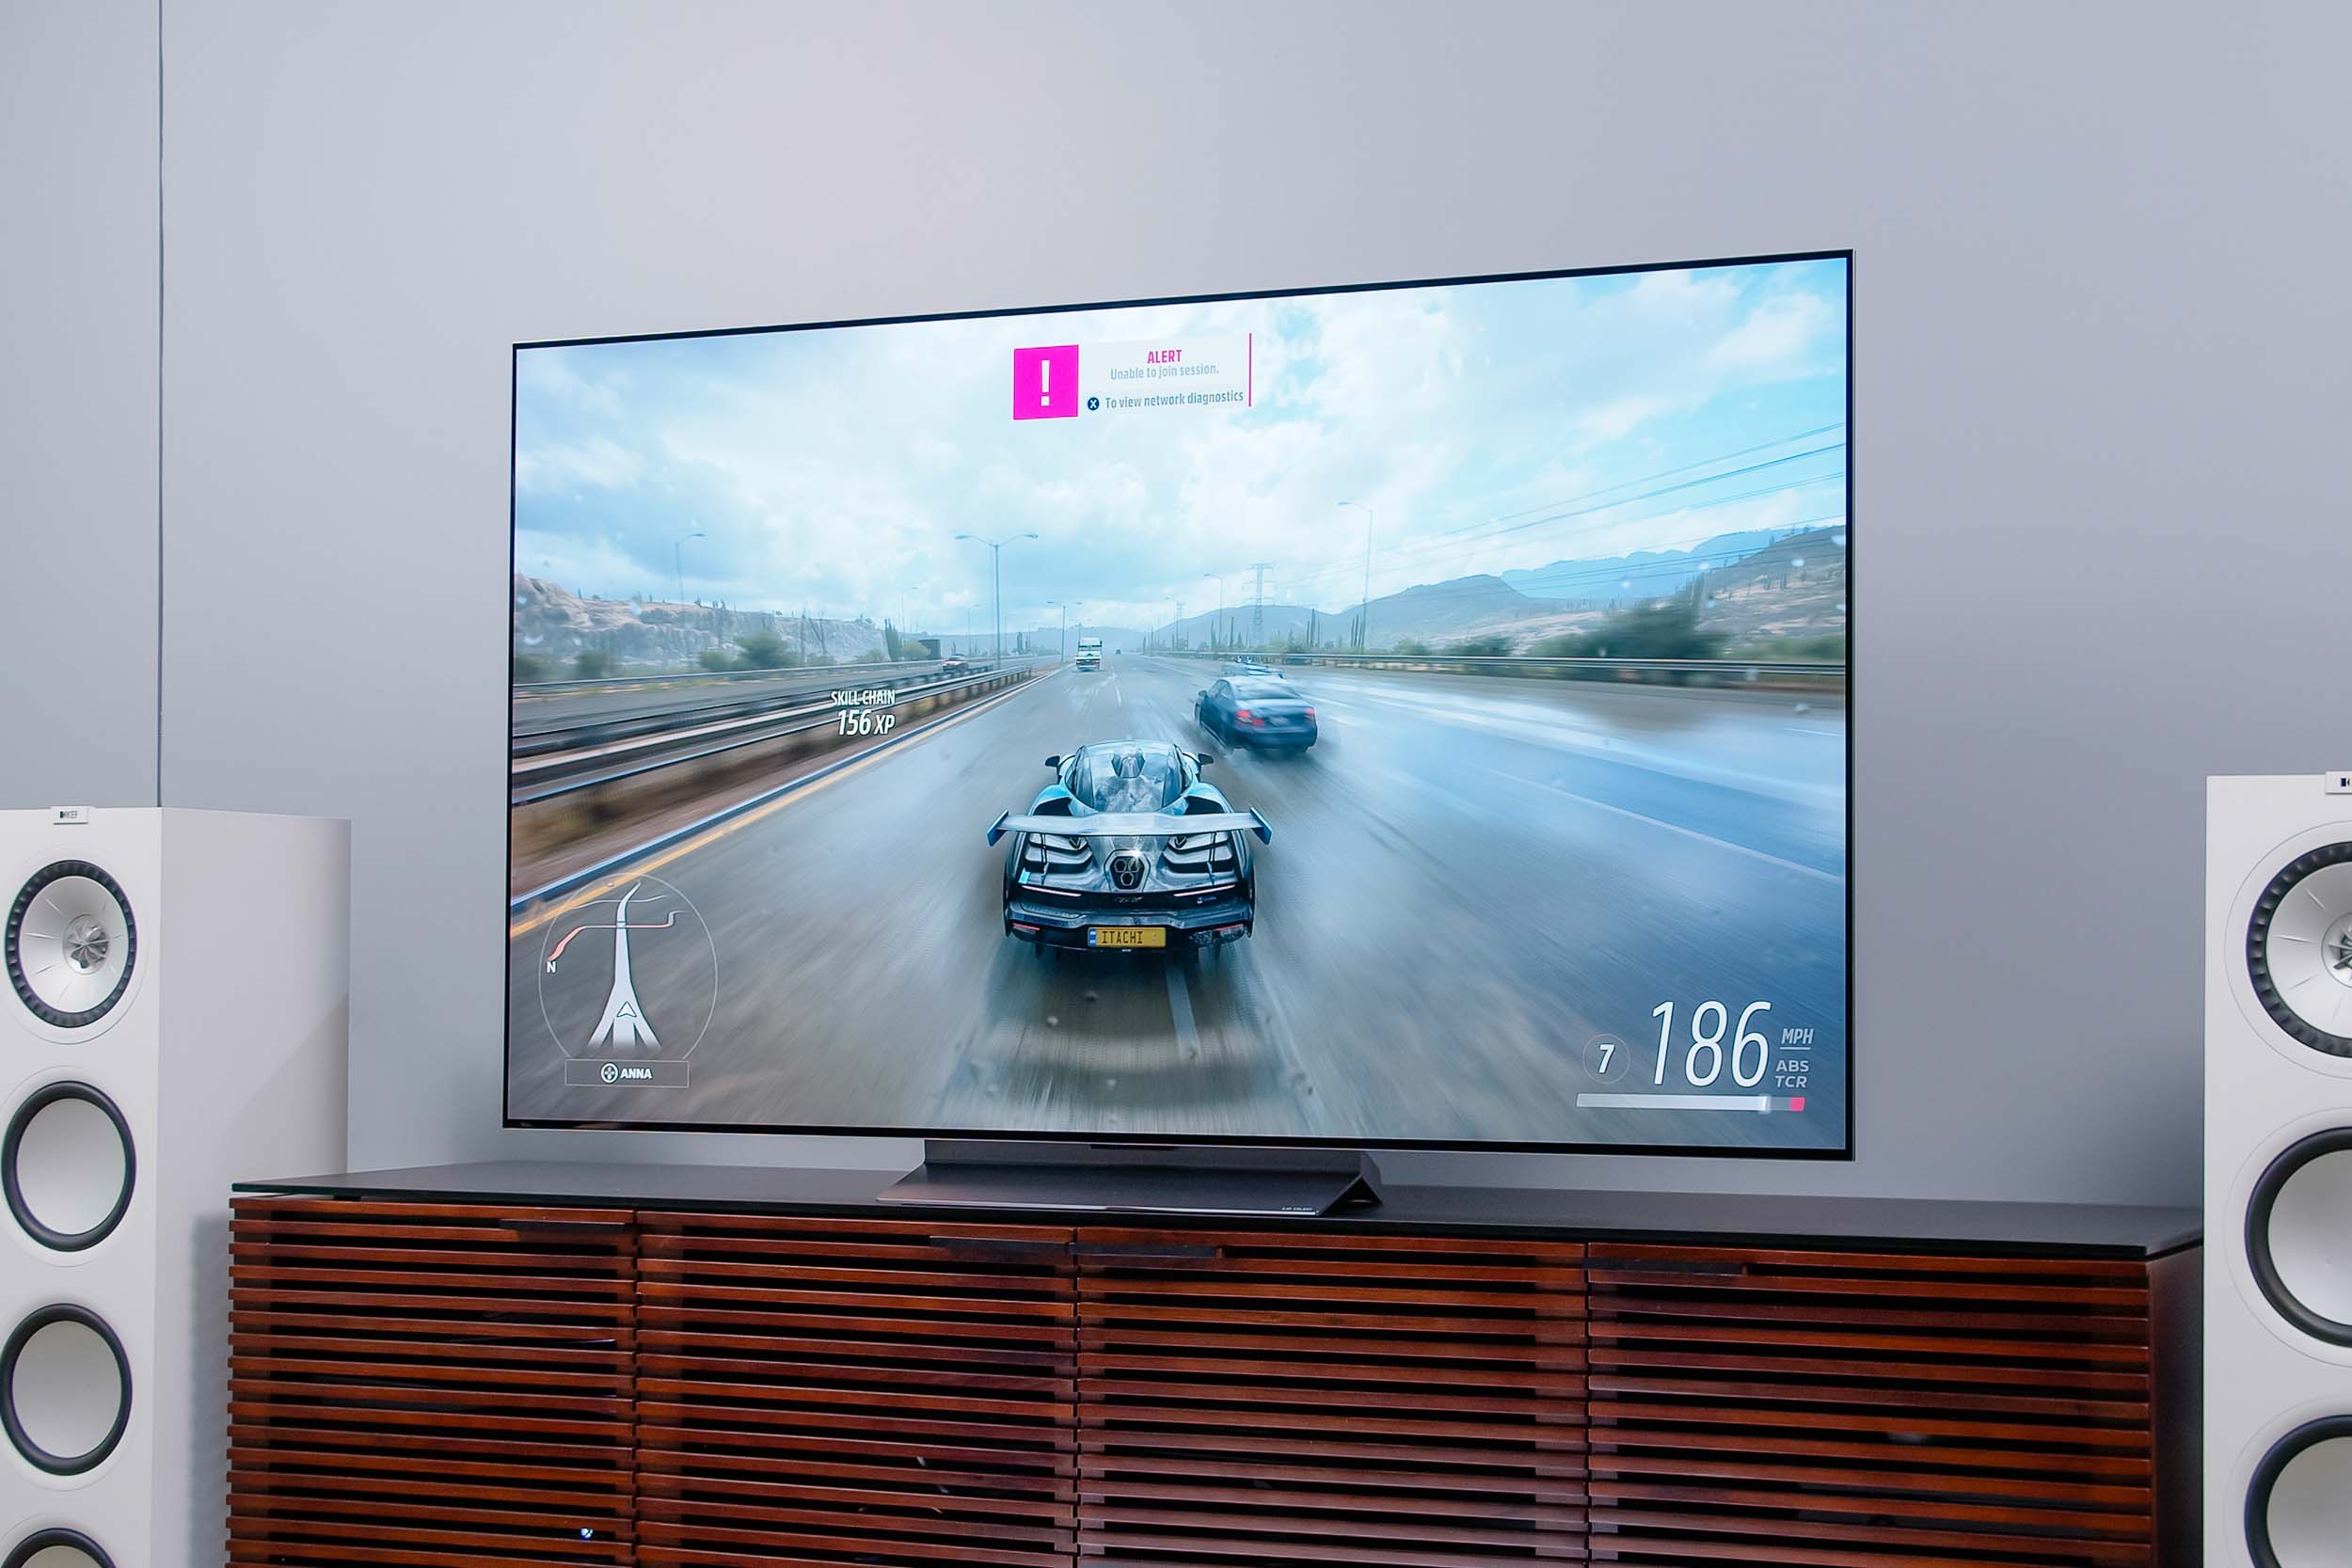 A racing video game being played on the LG C2 OLED TV.